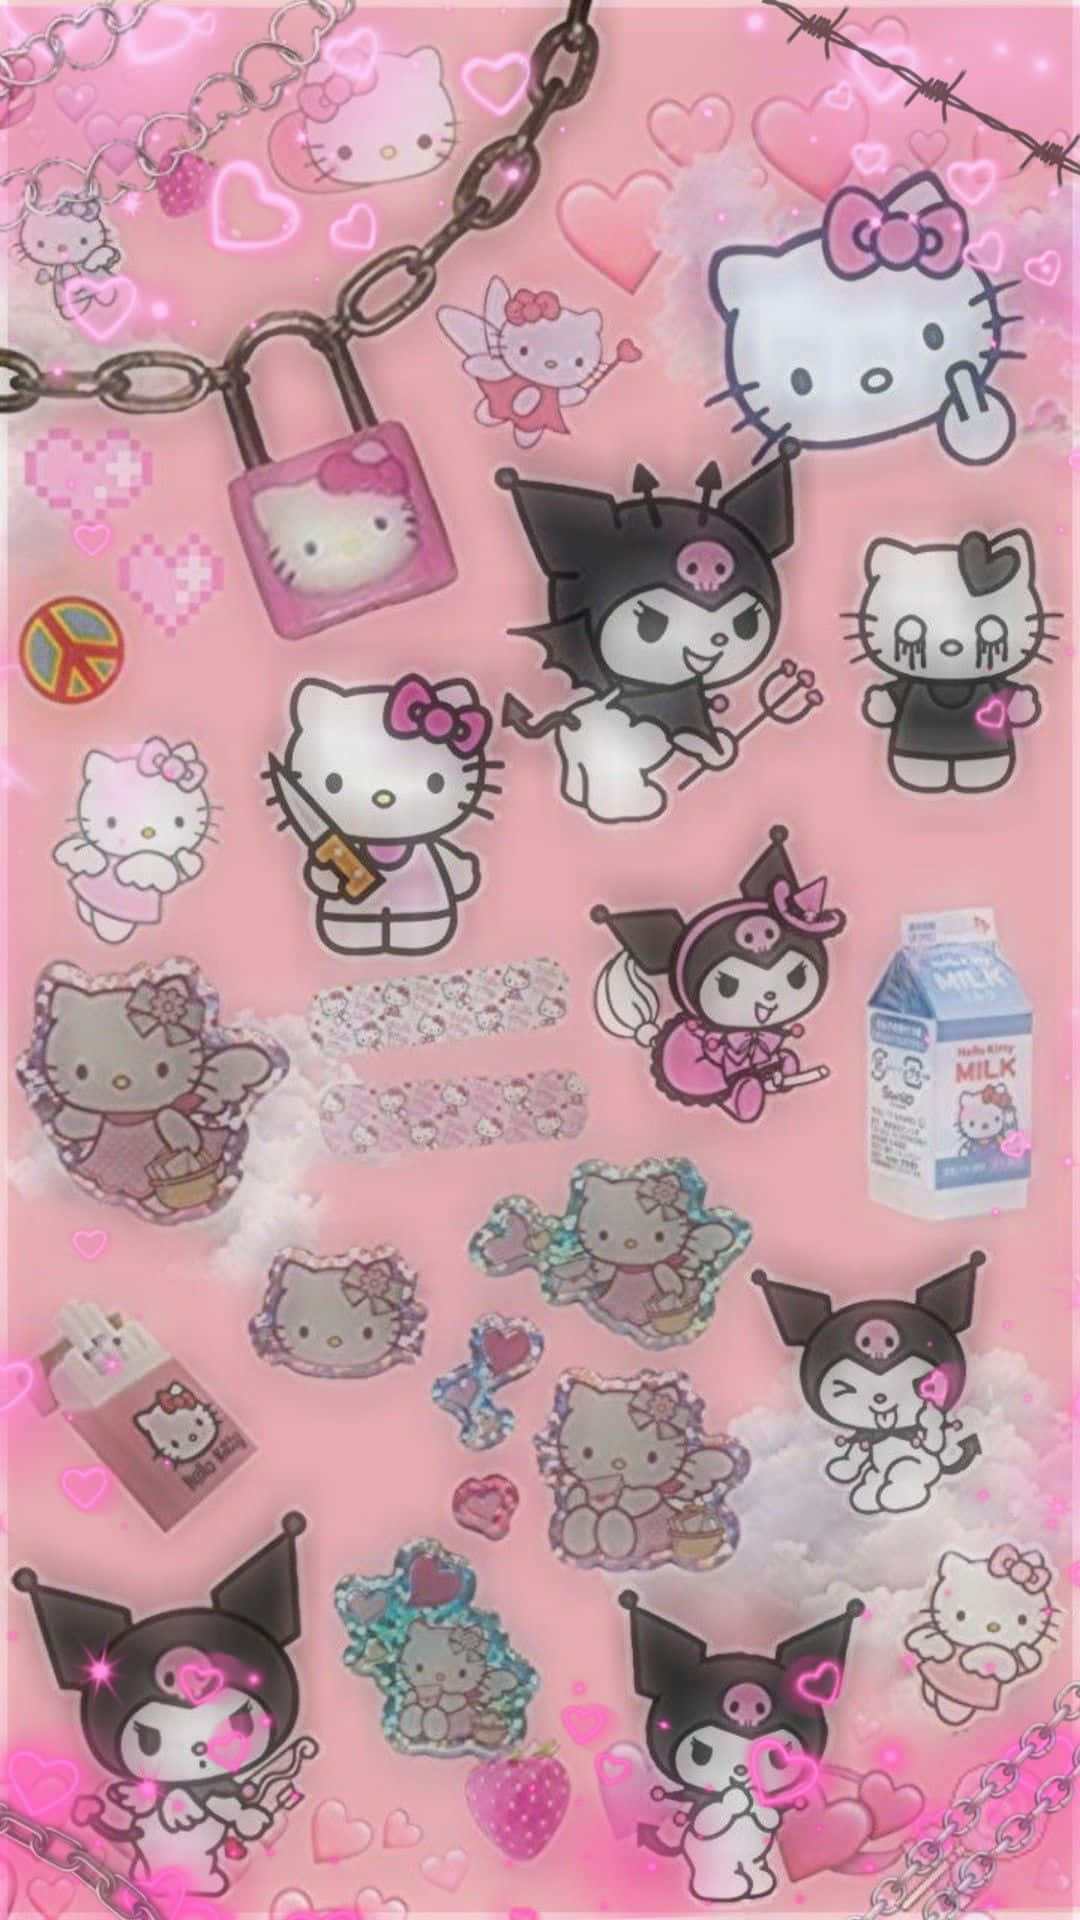 Add a touch of attitude to your day with Emo Hello Kitty Wallpaper